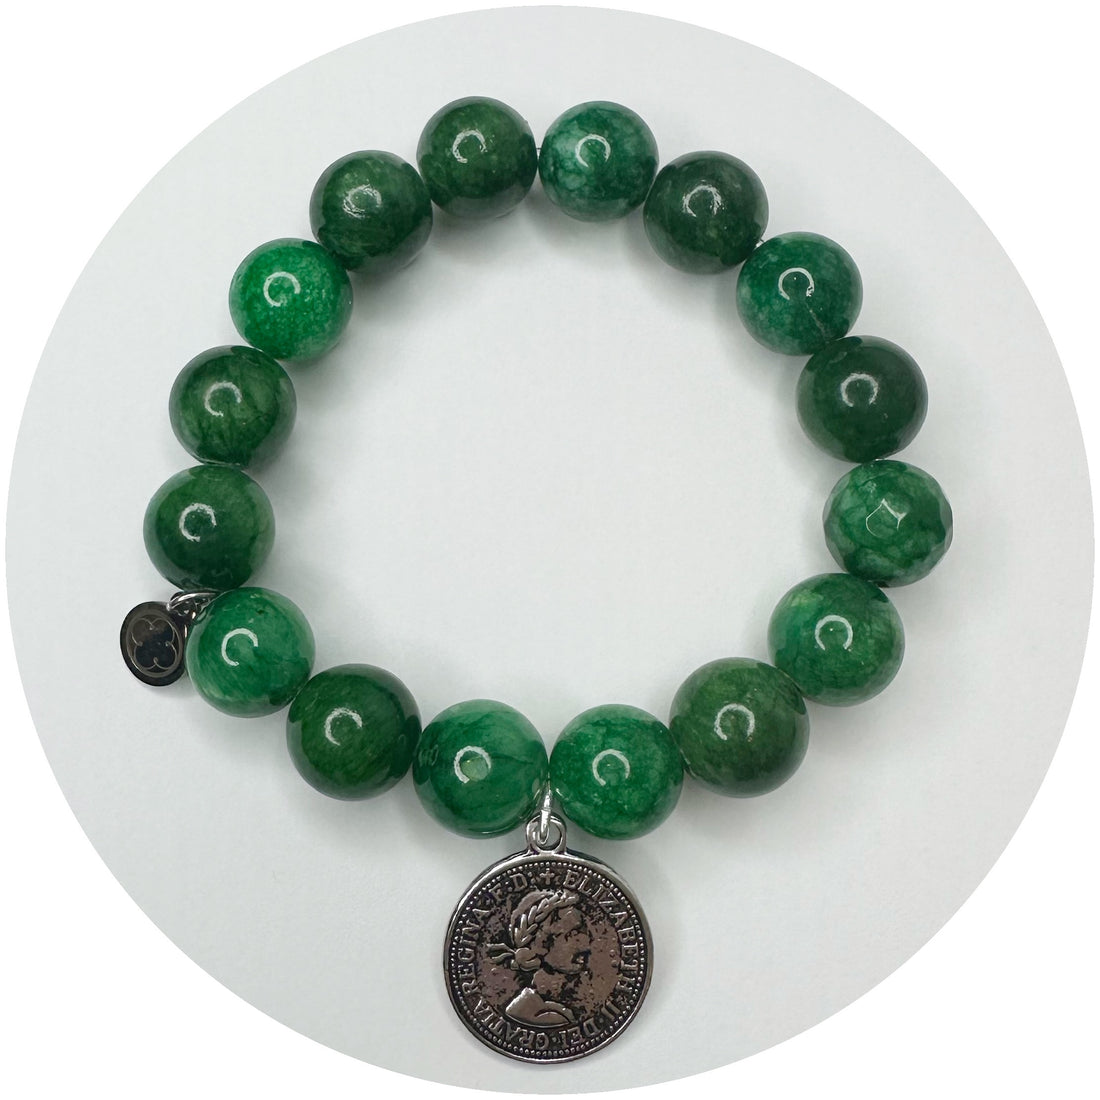 Emerald Green Jade with Antique Coin Pendant